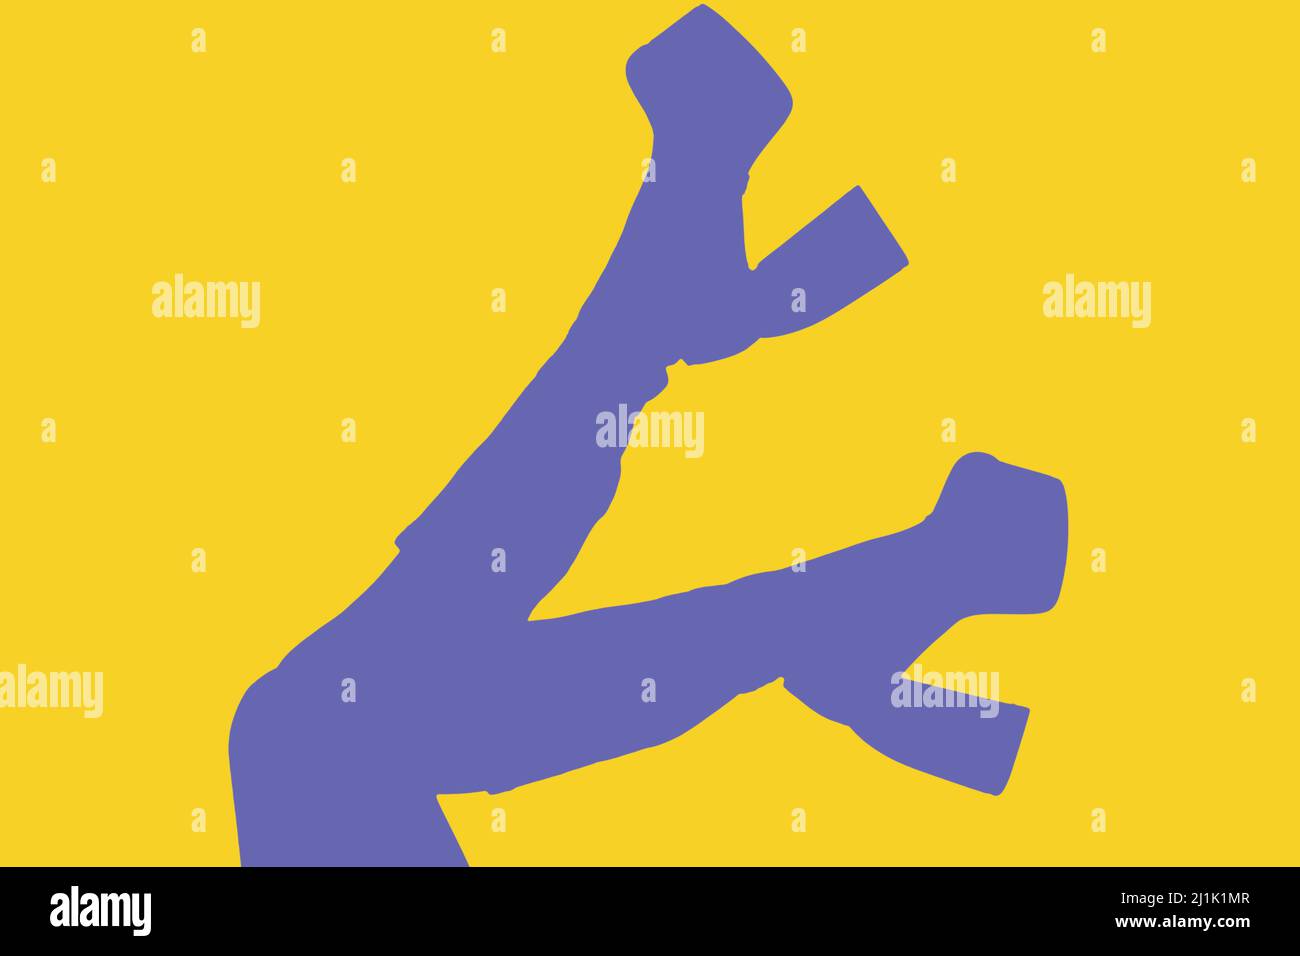 Fashionable women's boots on high platform on yellow background. Silhouette slender feet in high-heeled boots. Advertising illustration of shoes. Stock Photo